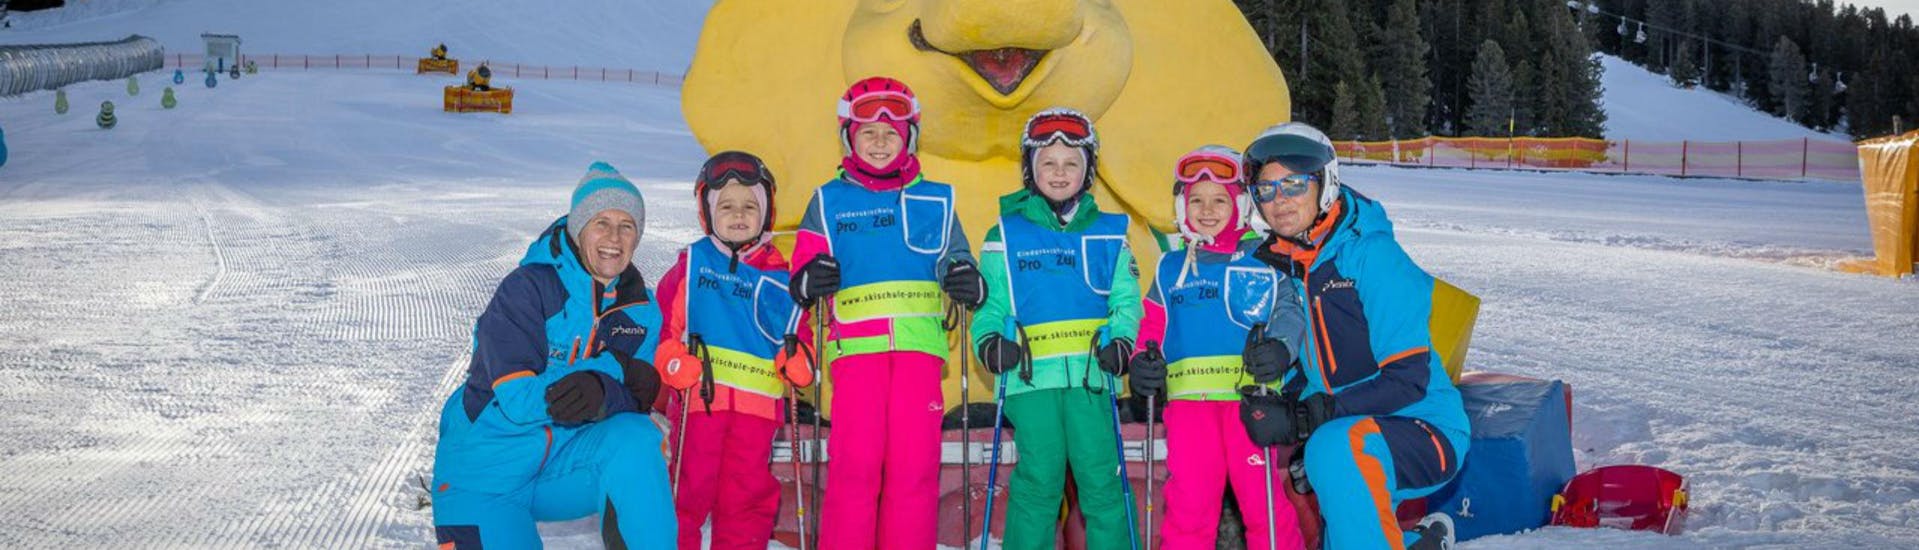 A group of children and their two ski instructors from the ski school Skischule Pro Zell in Zell am Ziller are posing for a photo in the Kinderland area during their Private Ski Lessons for Kids.